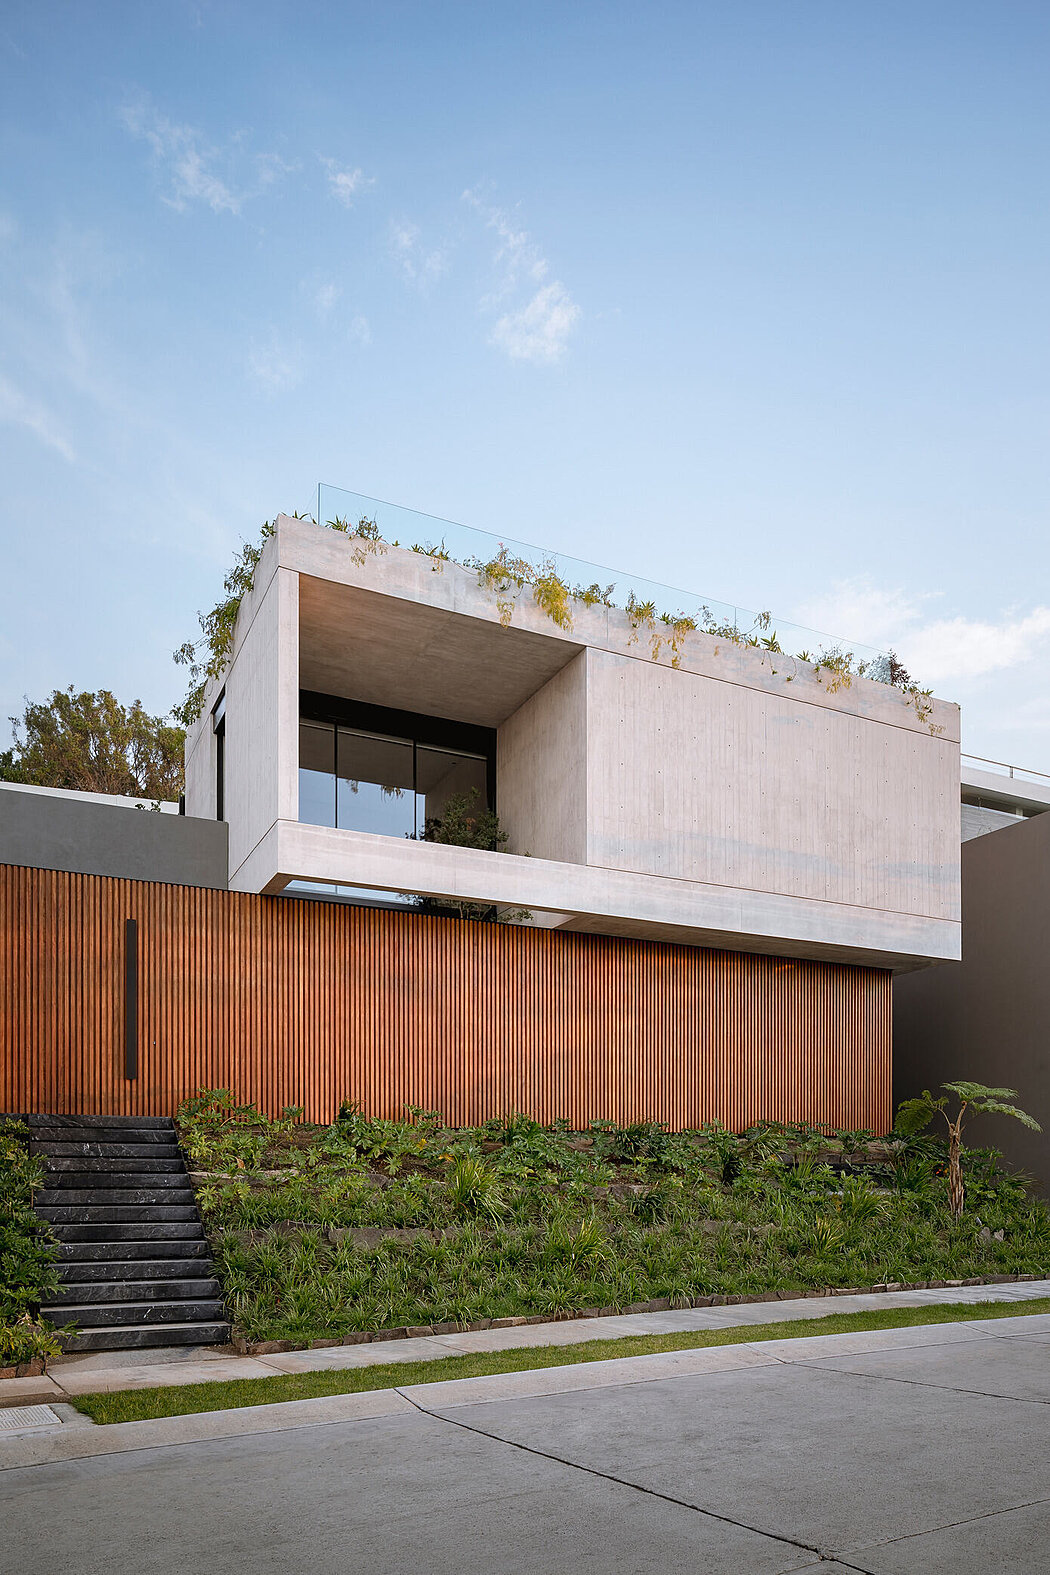 GDL 3 House: A Contemporary Two-Story Home in Zapopan - 1